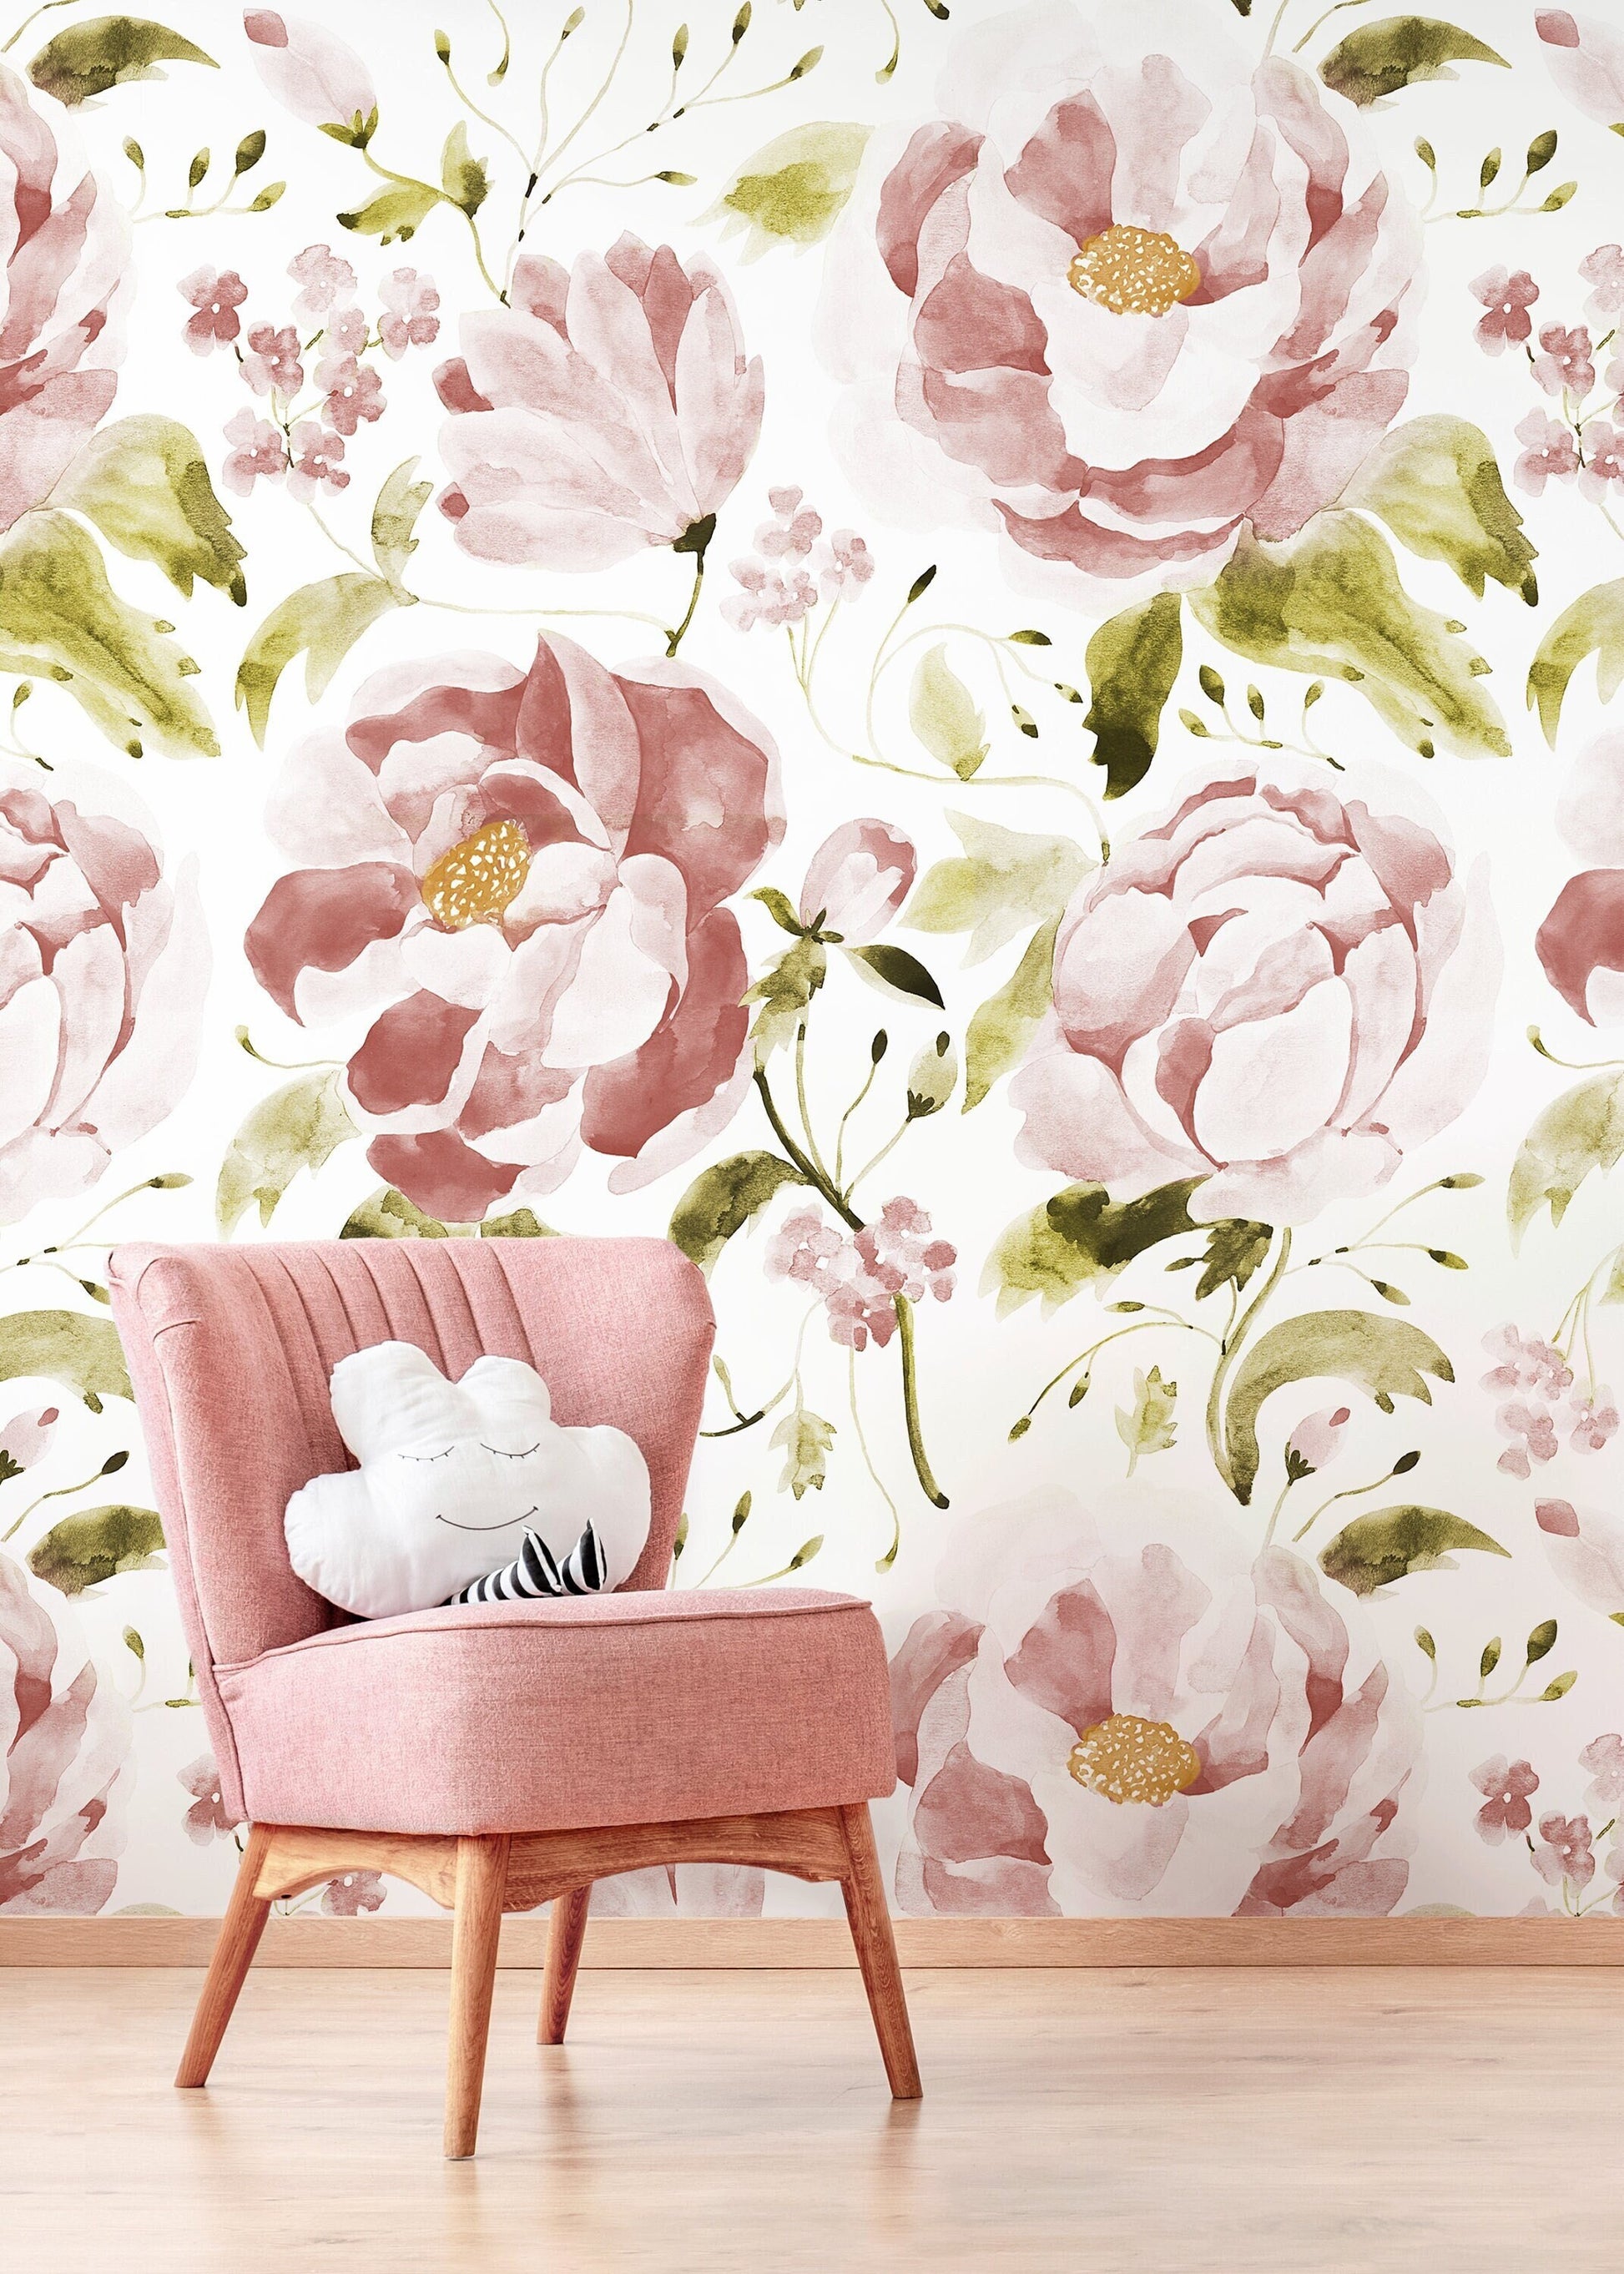 Pink Vintage Floral Wallpaper / Peel and Stick Wallpaper Removable Wallpaper Home Decor Wall Art Wall Decor Room Decor - C965